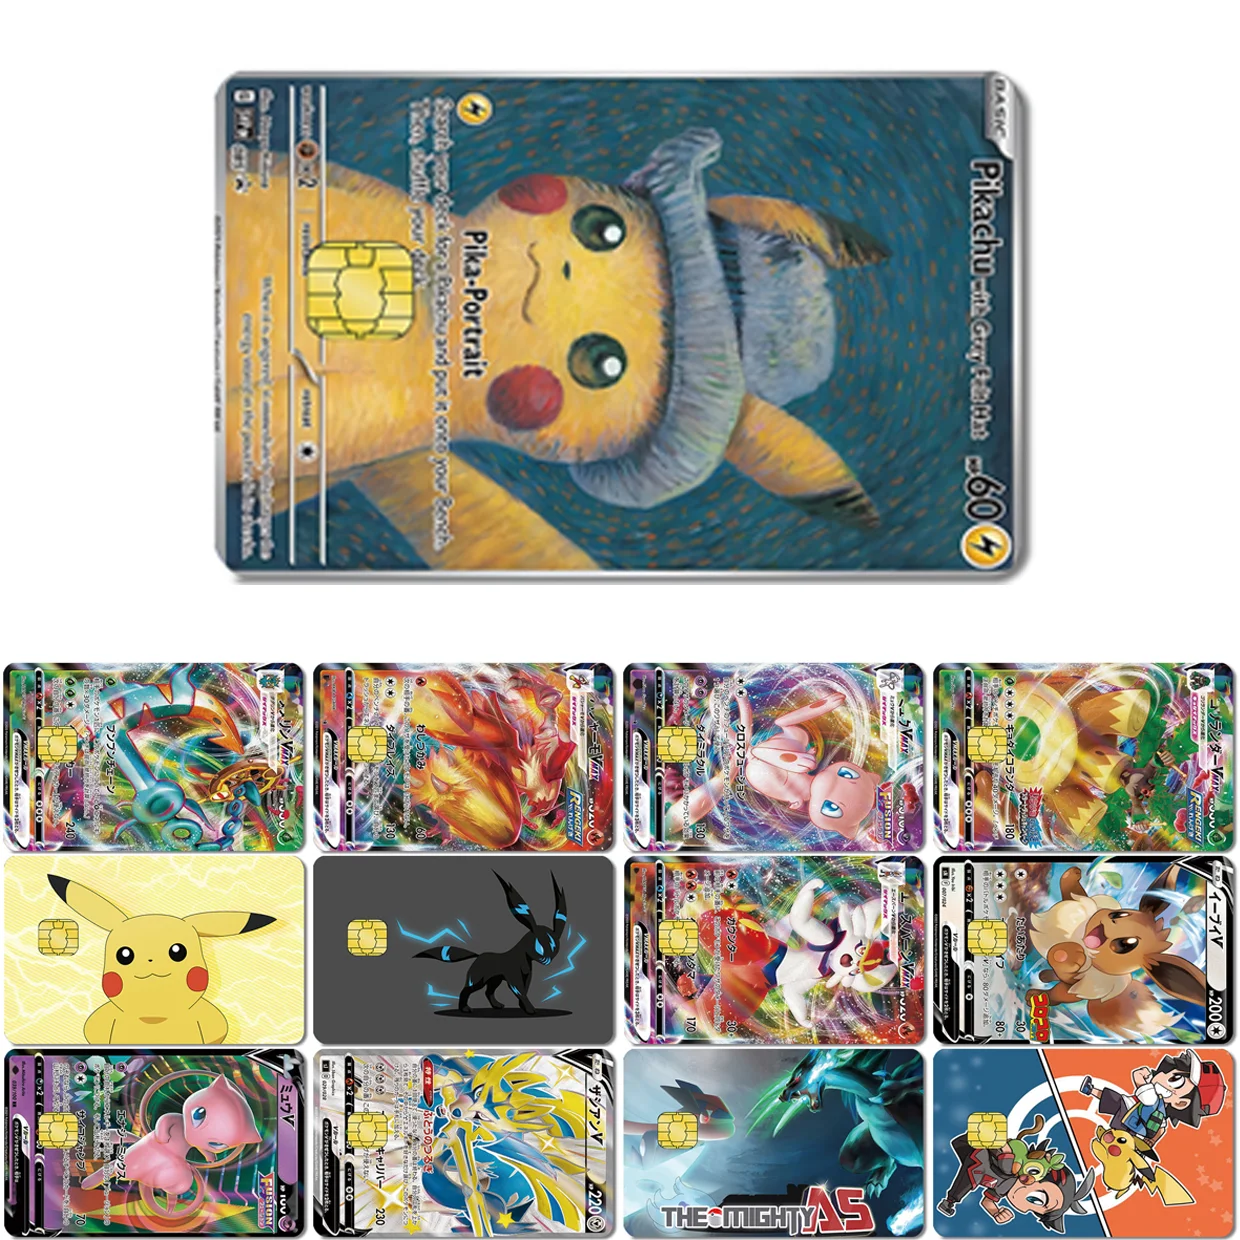 

Anime Pokemon Van Gogh Pikachu Small Chip Debit Bus Credit Card Sticker Waterproof and Scratch-Resistant Collection Toy Gifts